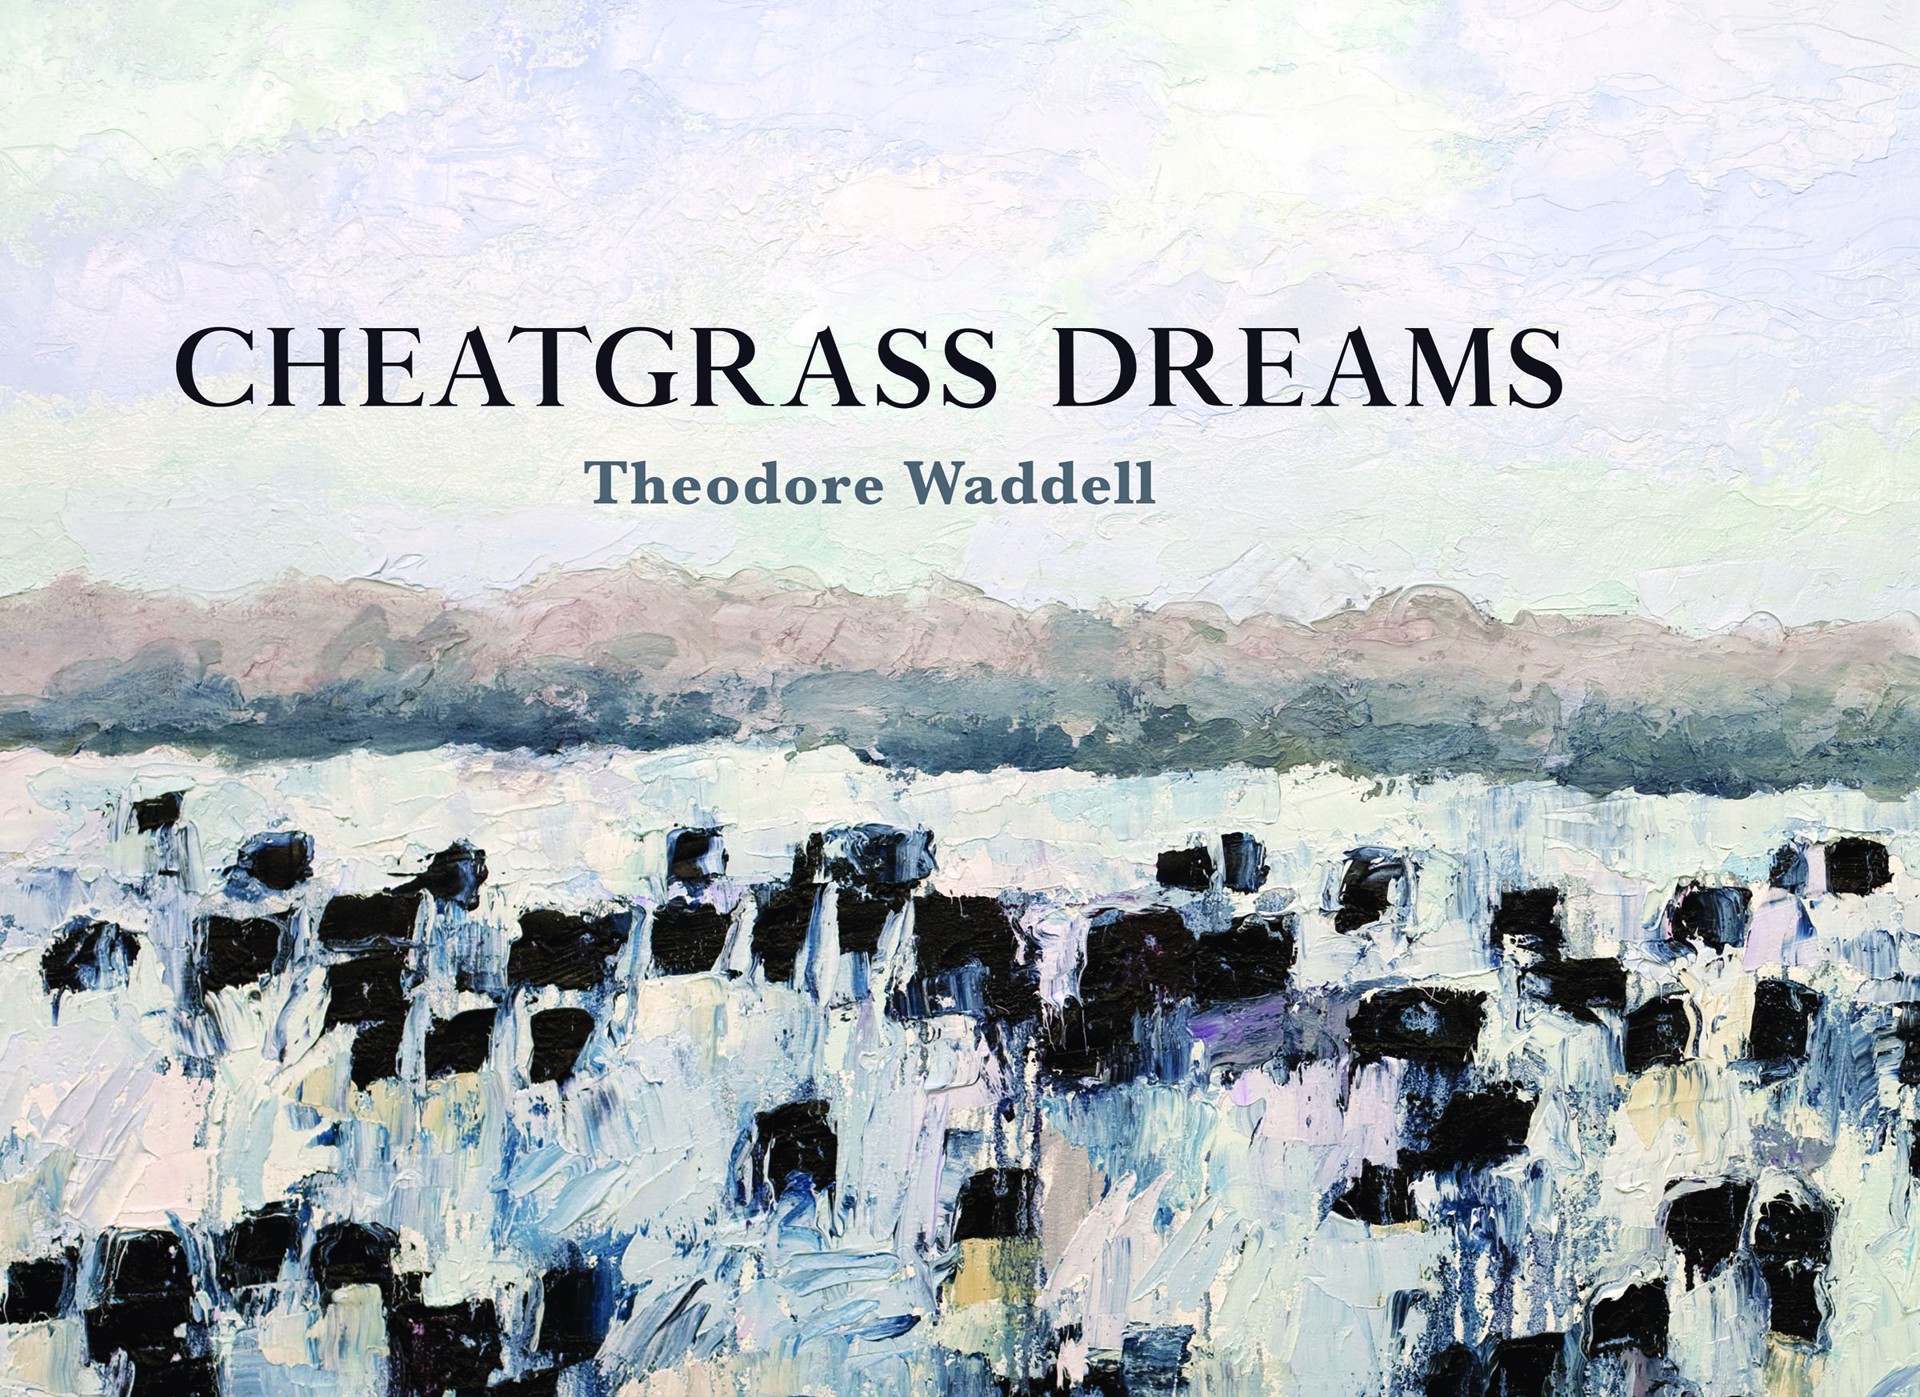 Cheatgrass Dreams by Theodore Waddell